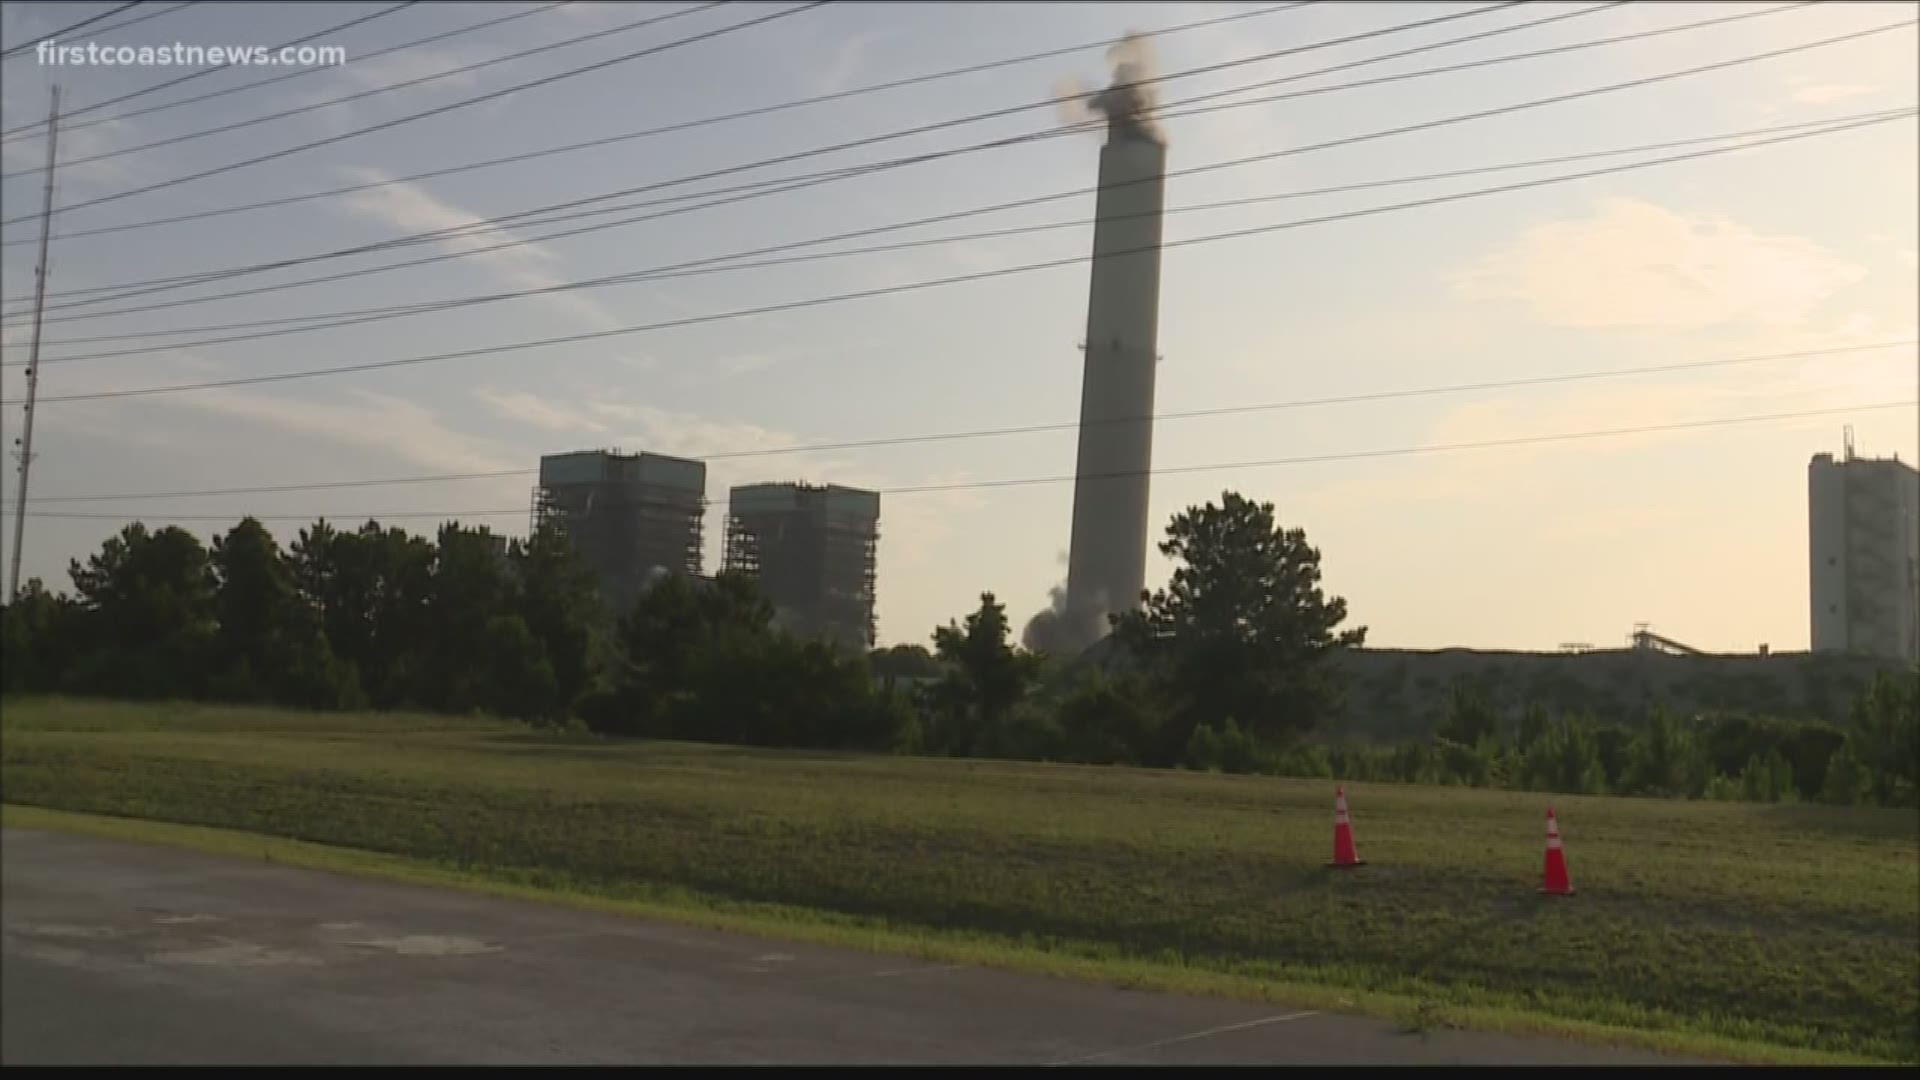 This implosion finishes the series of implosions for the power park. The first took place last June where it took just 12 seconds for 1,500 pounds of dynamite to bring down two towers measuring about 462-feet tall.